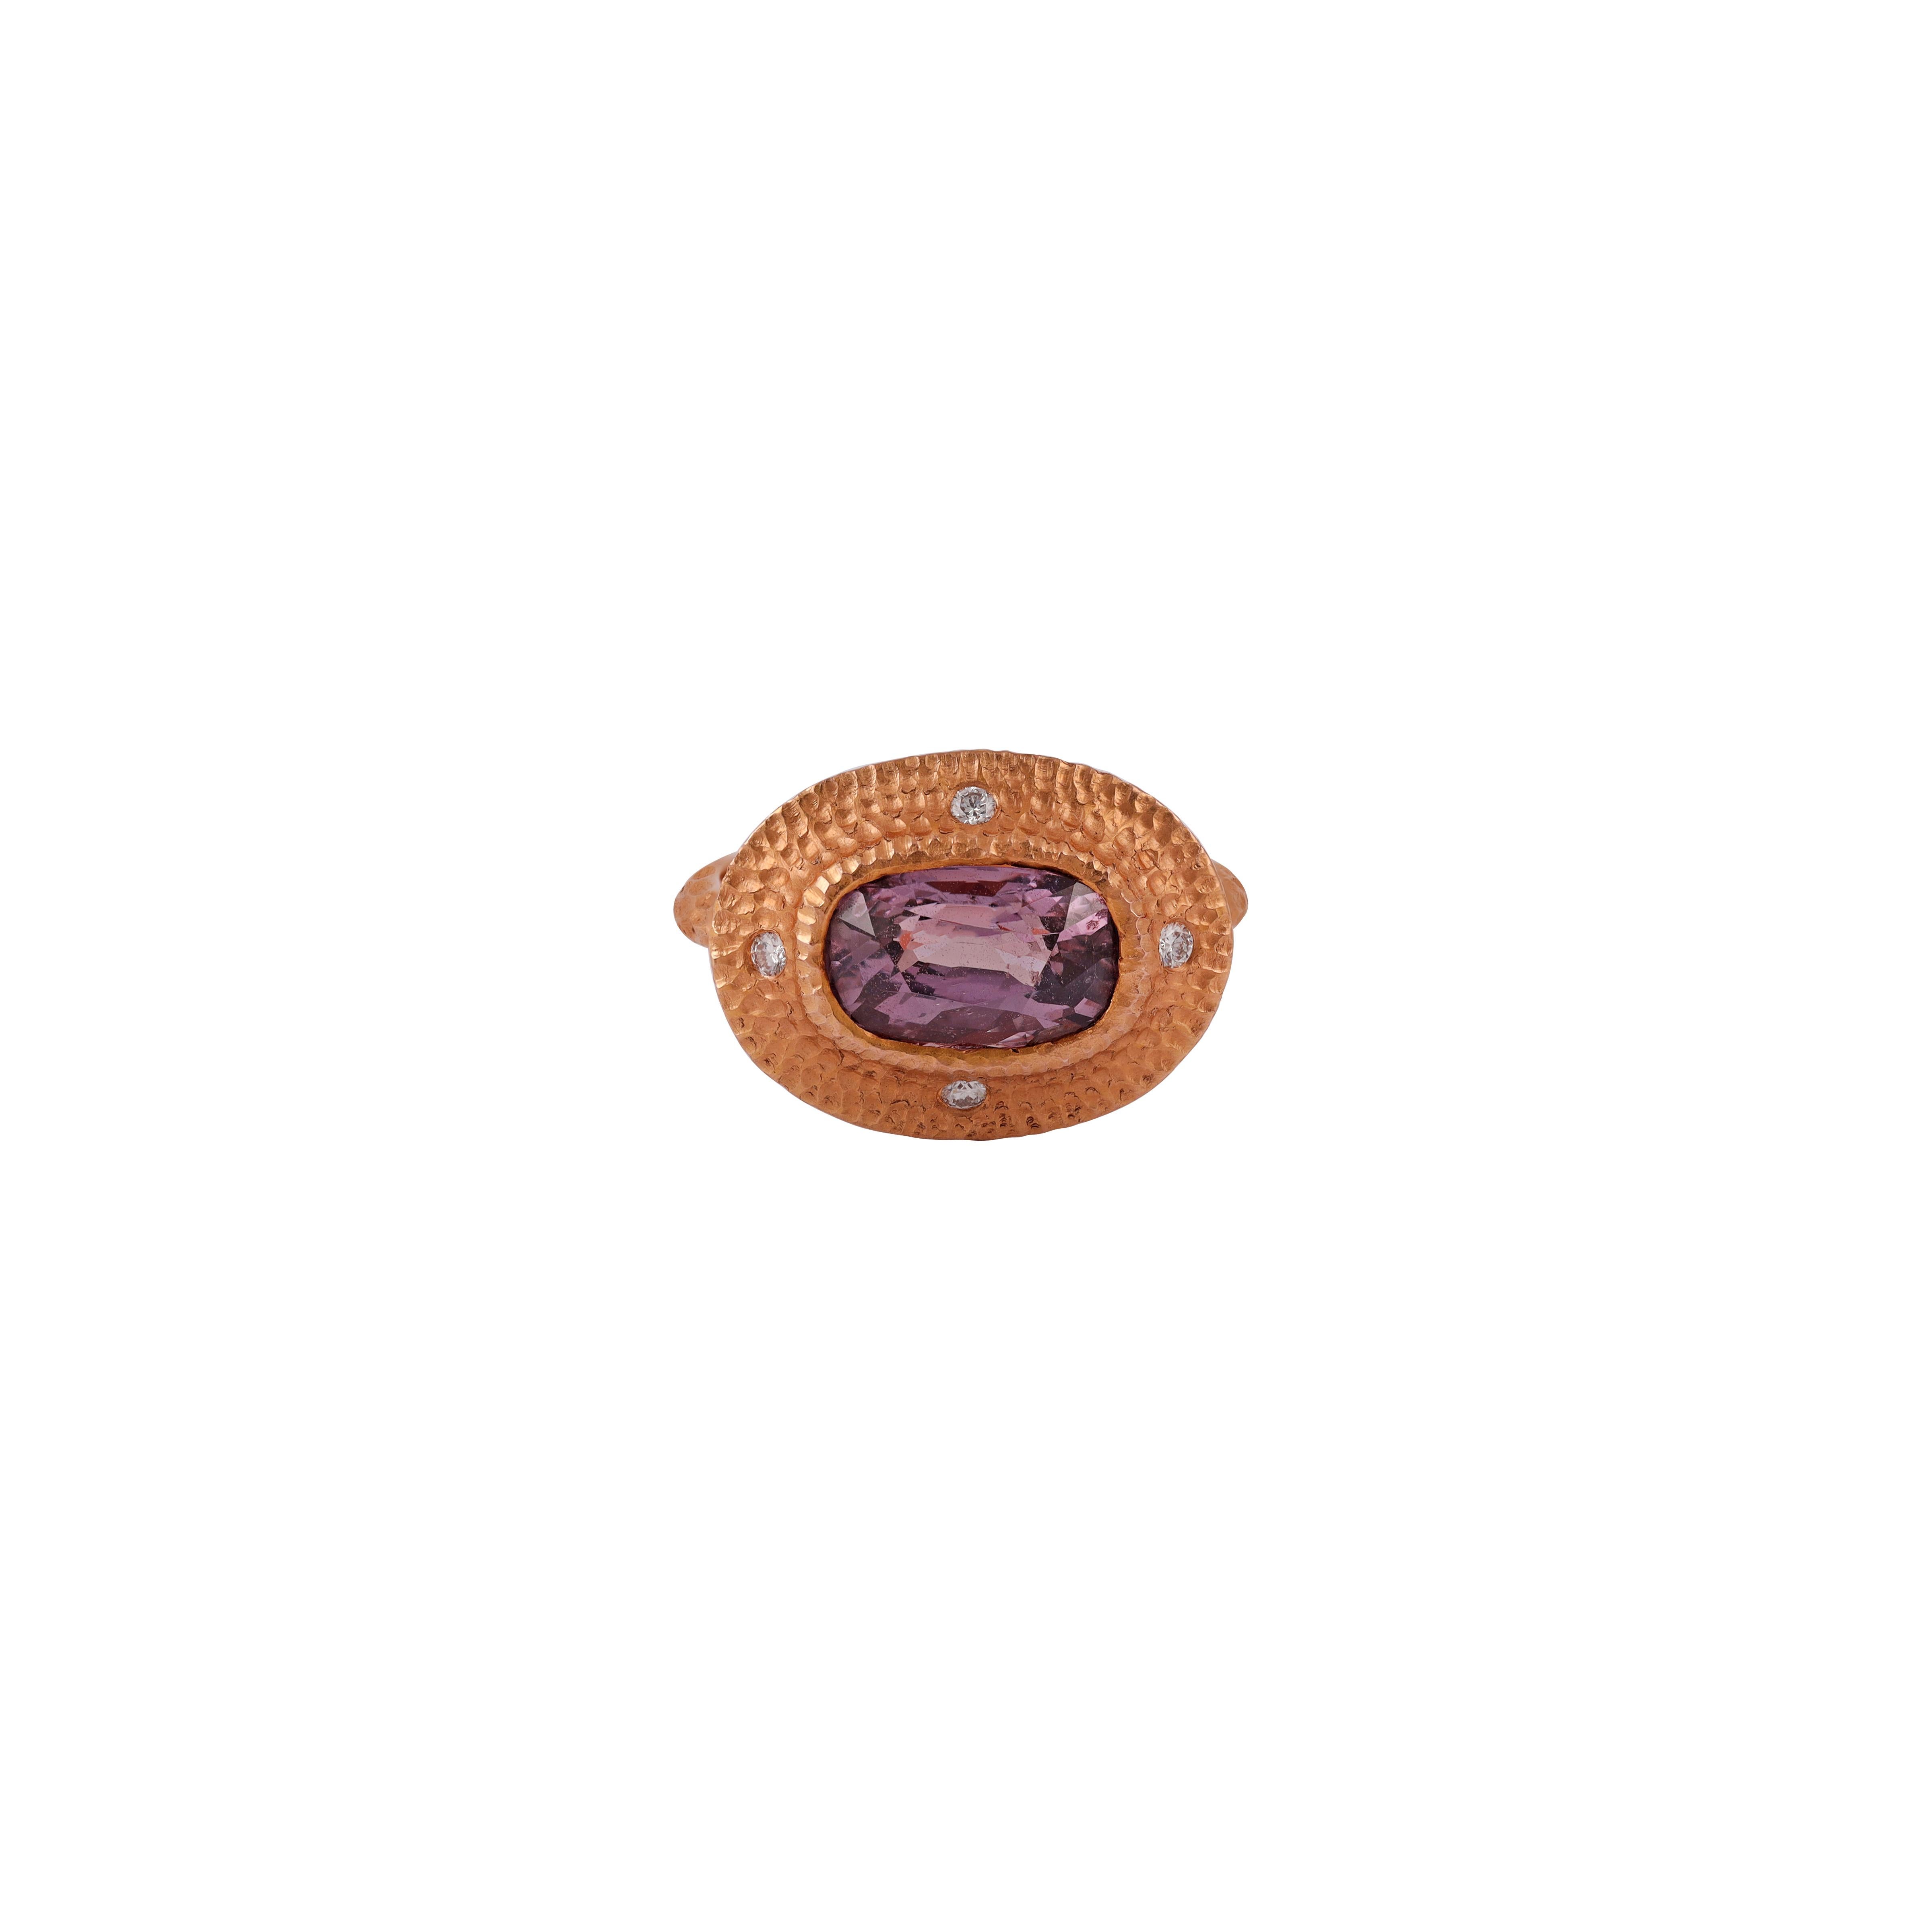  Sapphire Ring Surrounded by Round Brilliant Cut Diamond With Matt Gold.
1 Oval Sapphire 3.19 CTS
 4 side 4 brilliant cut diamonds 0.07 CTS
18 k Matt gold mounting 6.14 GMS


Custom Services
Resizing is available.
Request Customization